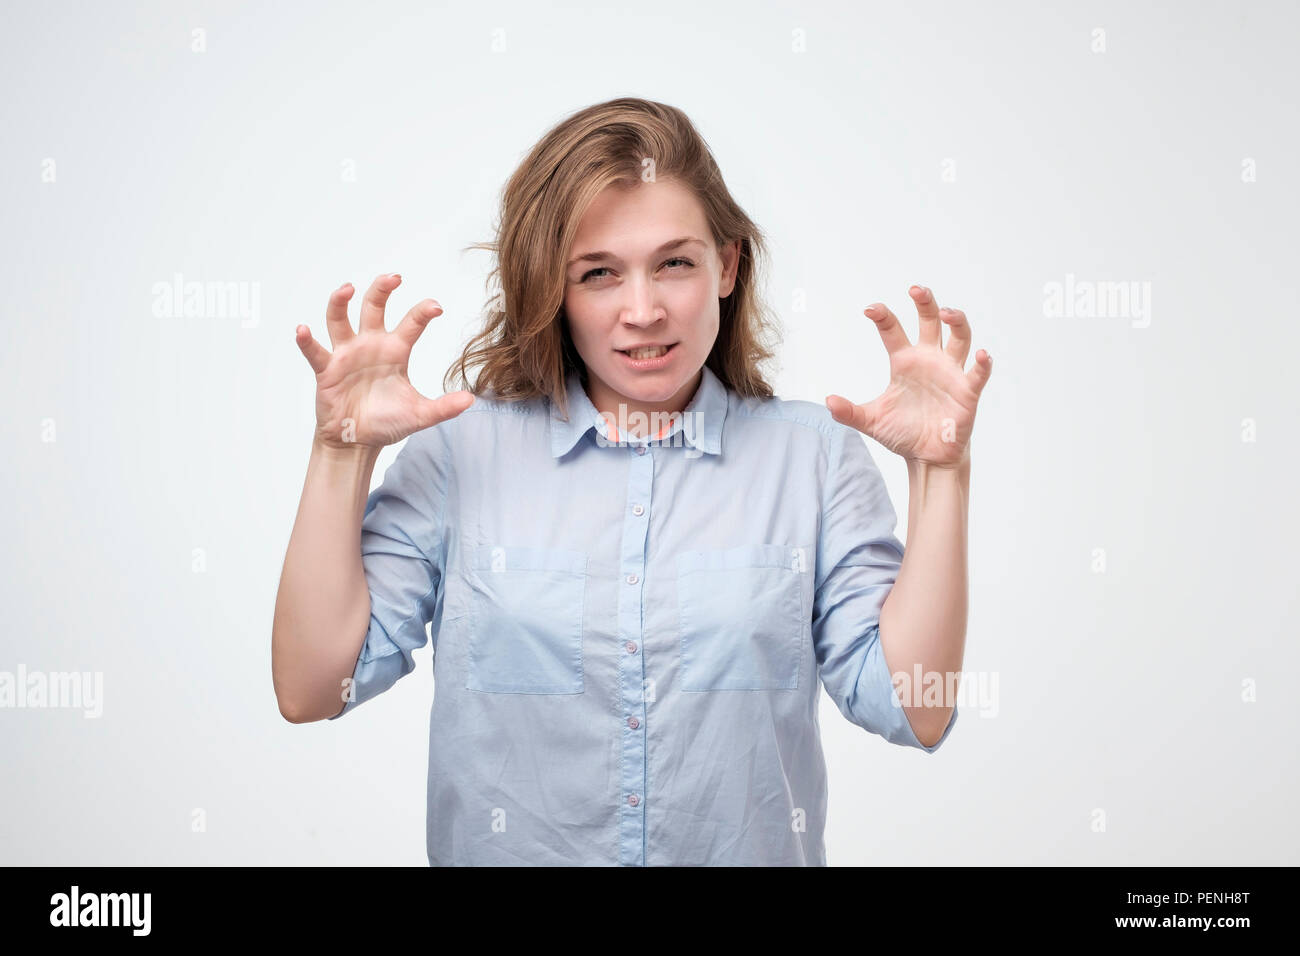 Caucasian woman showing her wild side posing in blue shirt growling at you and gesturing a claw shape with her hands, over gray background. Lose contr Stock Photo